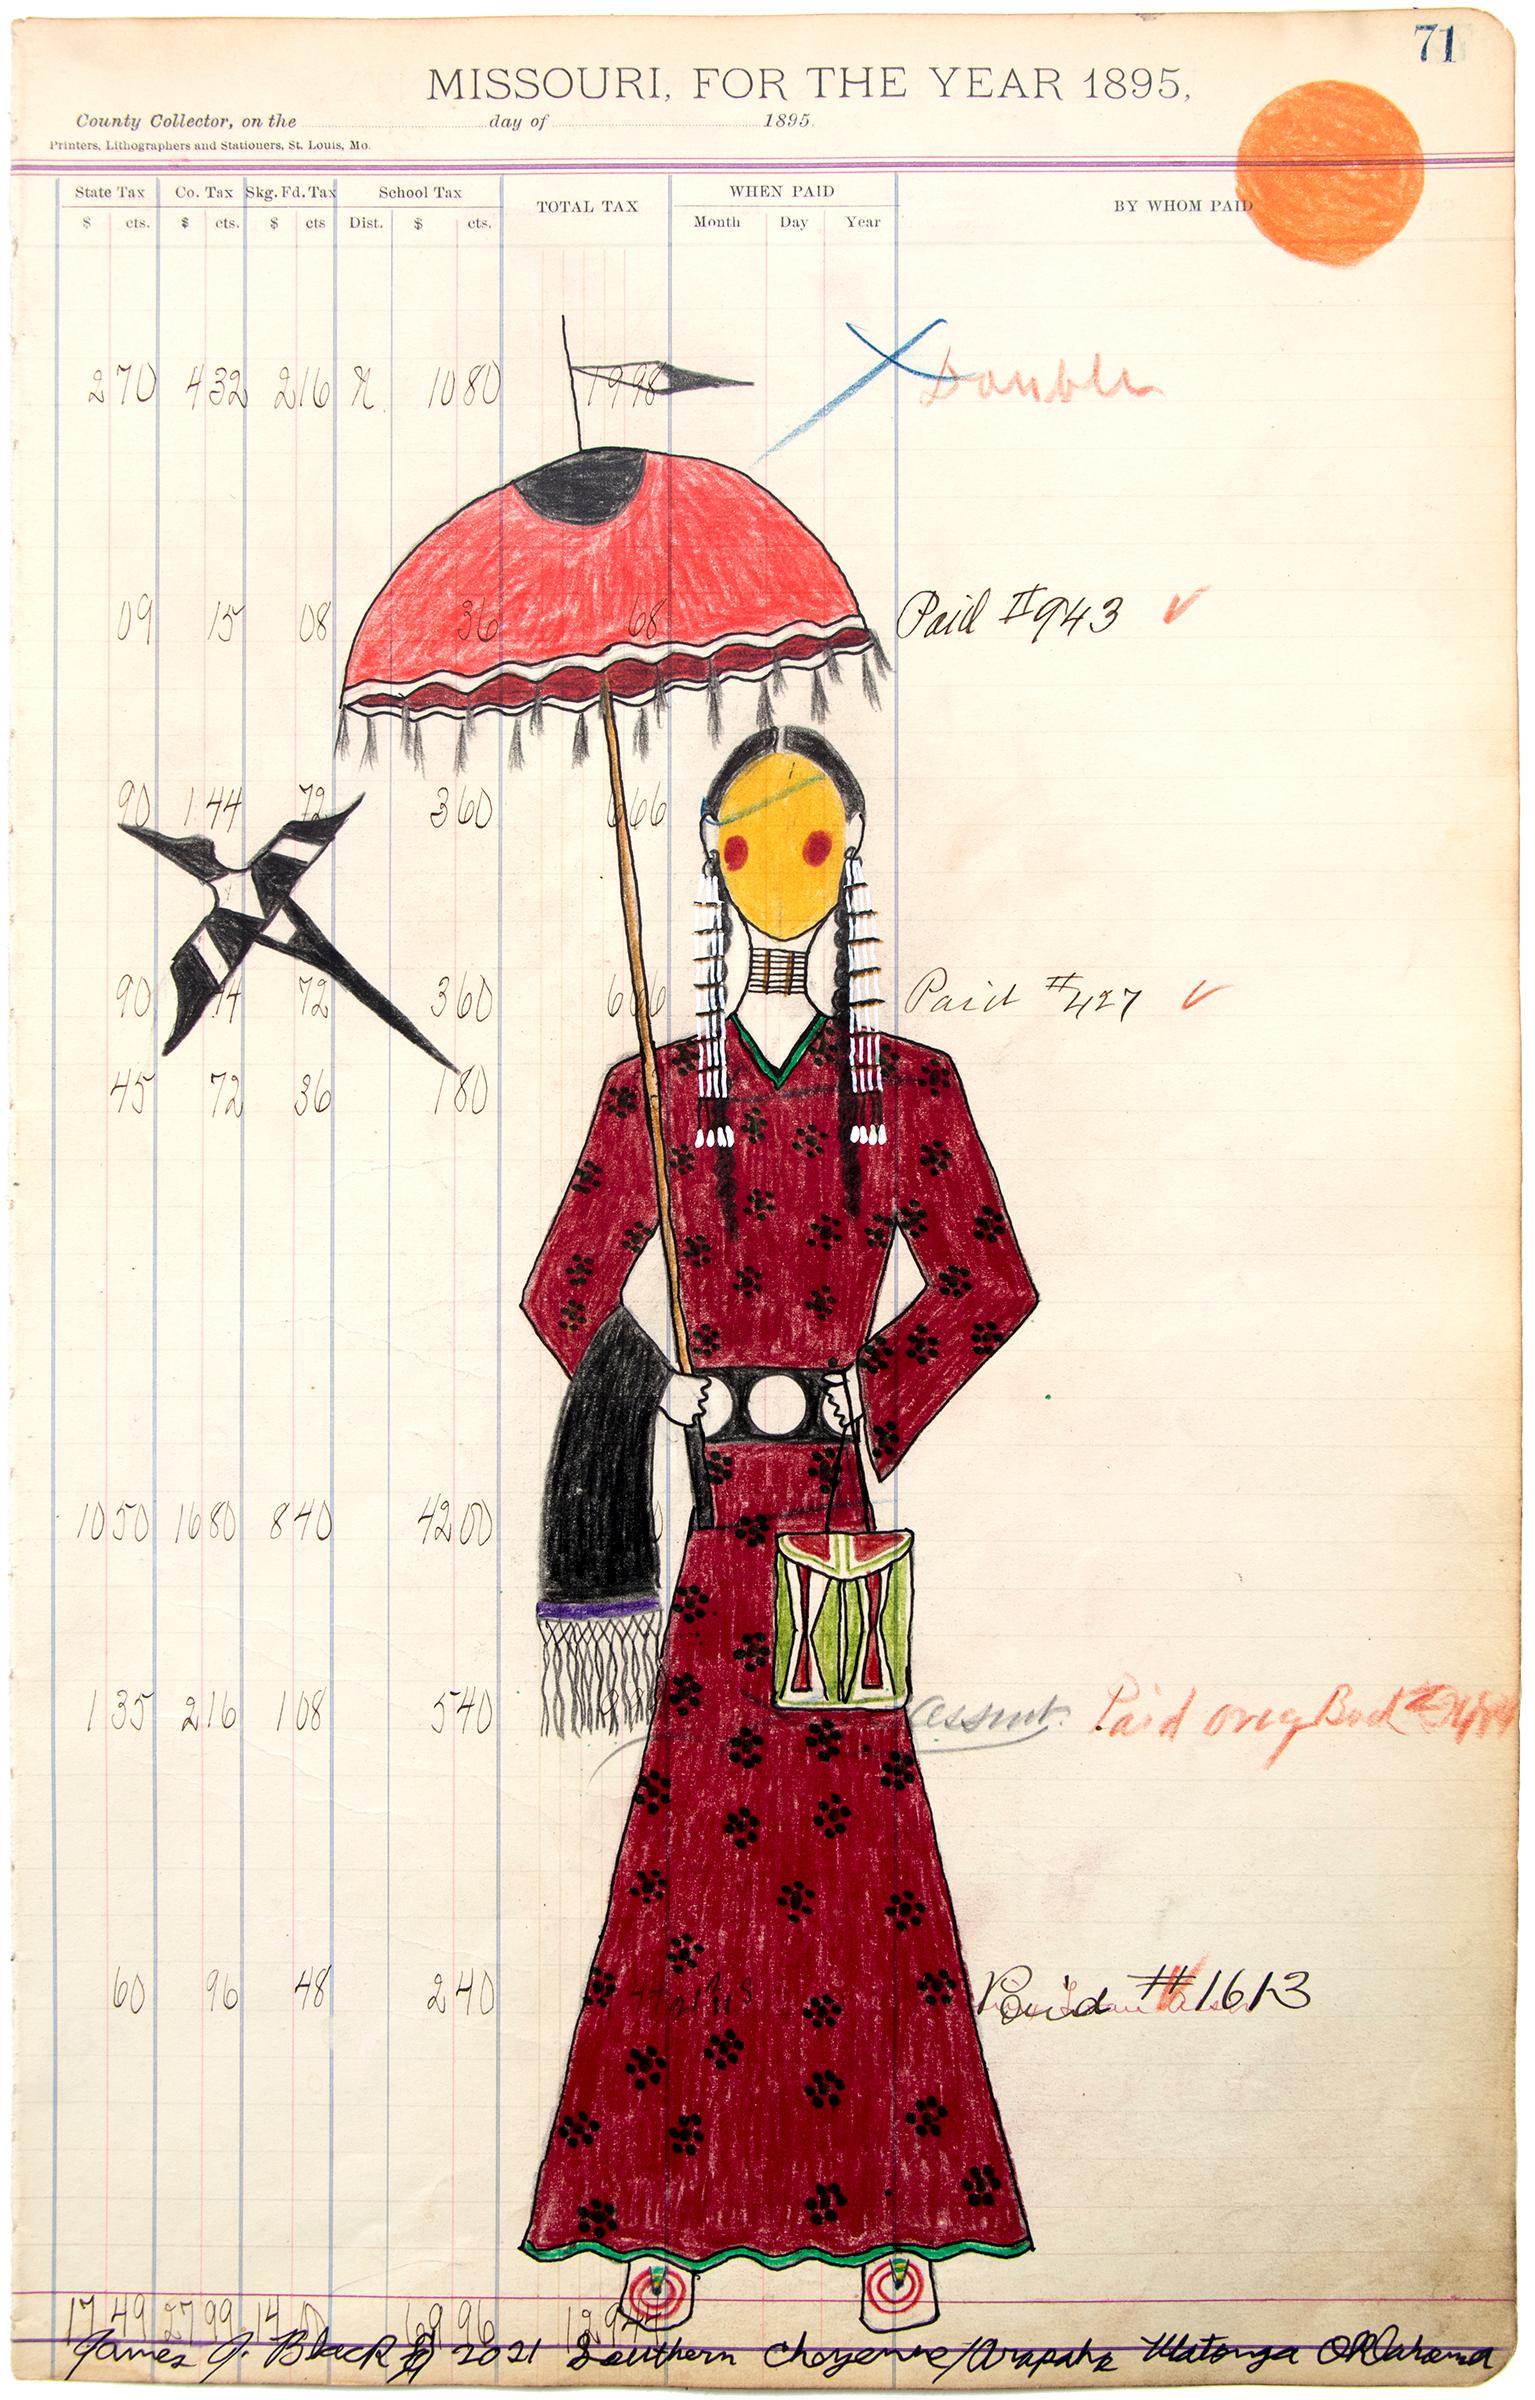 Untitled (Cheyenne Woman with Parfleche and Umbrella) is a crayon and marker on antique ledger paper drawing marked 